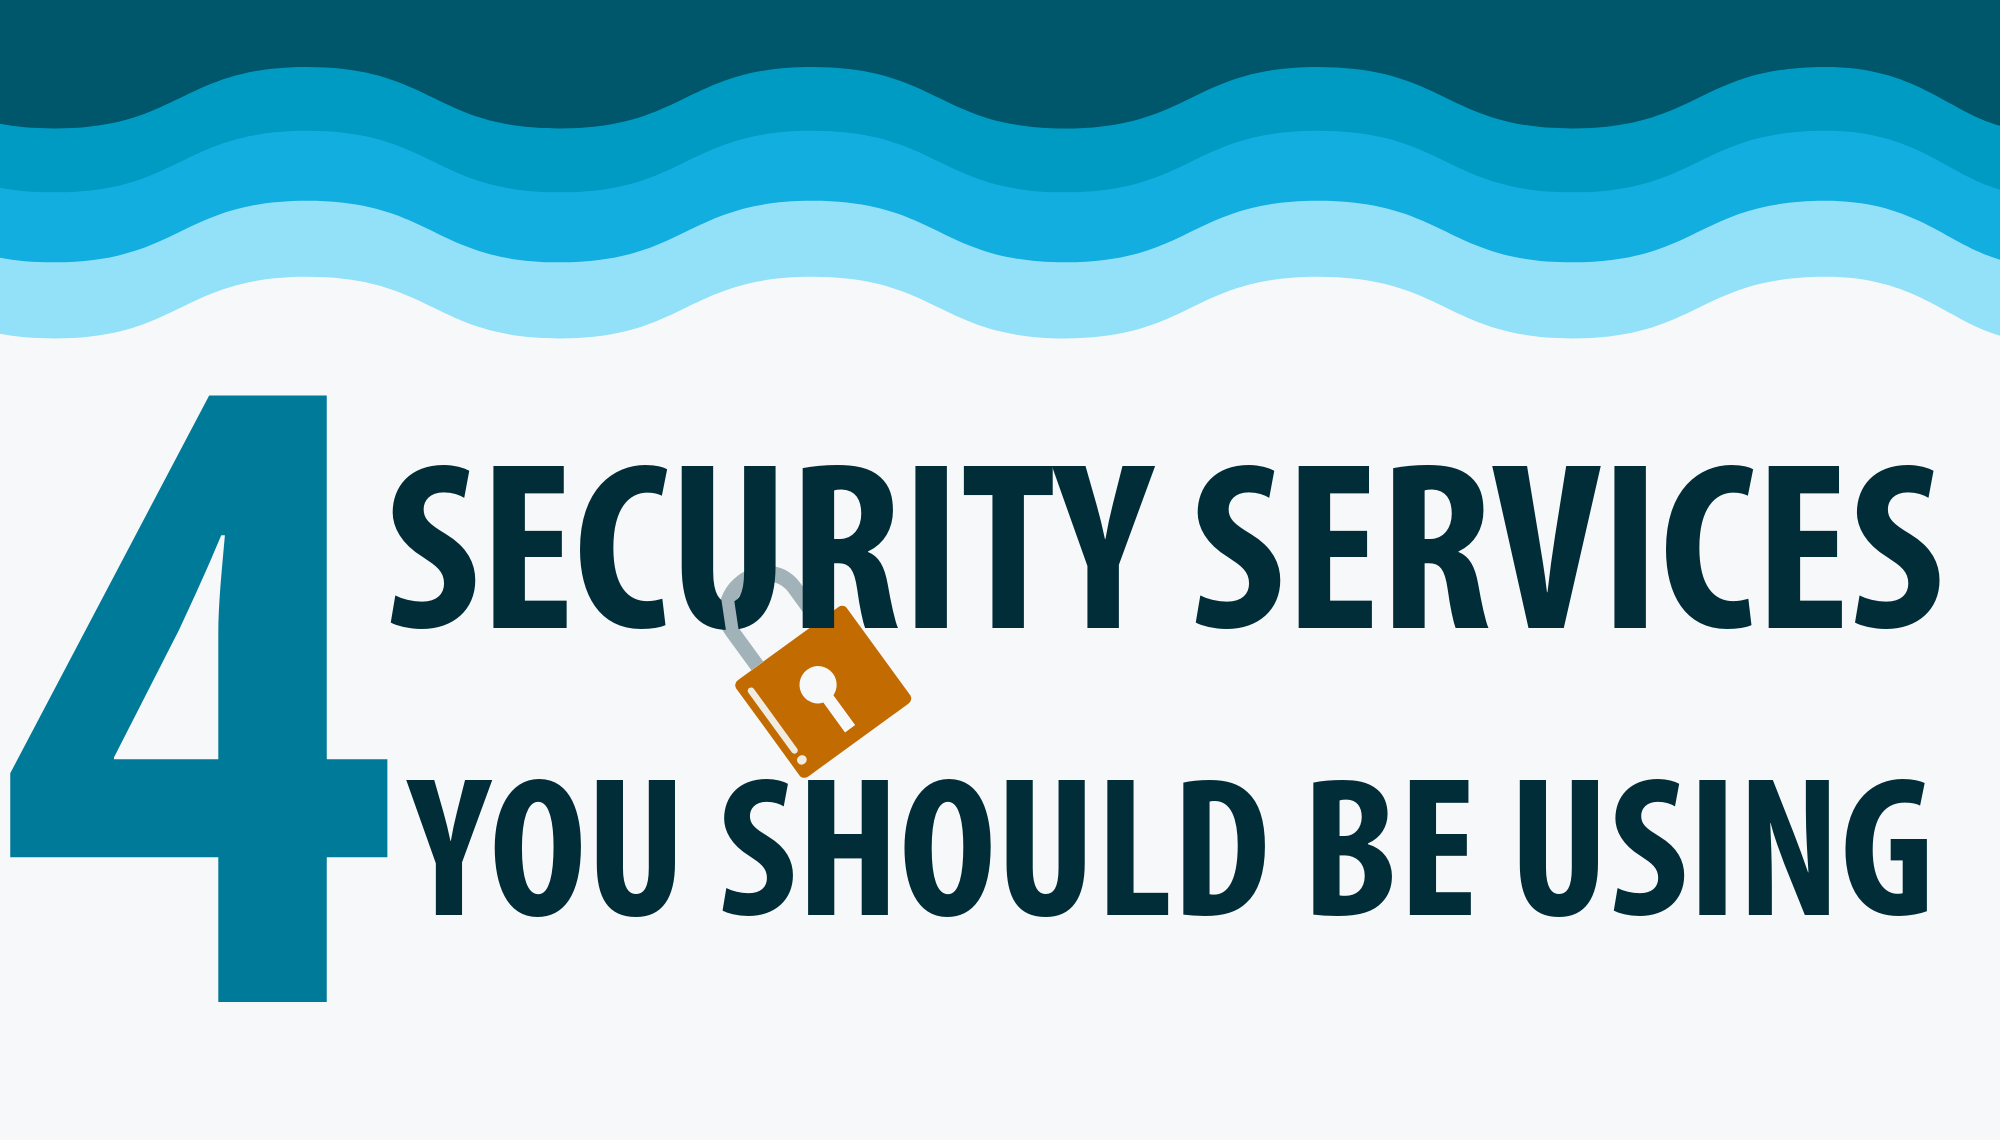 4 Security Services You Should be Using